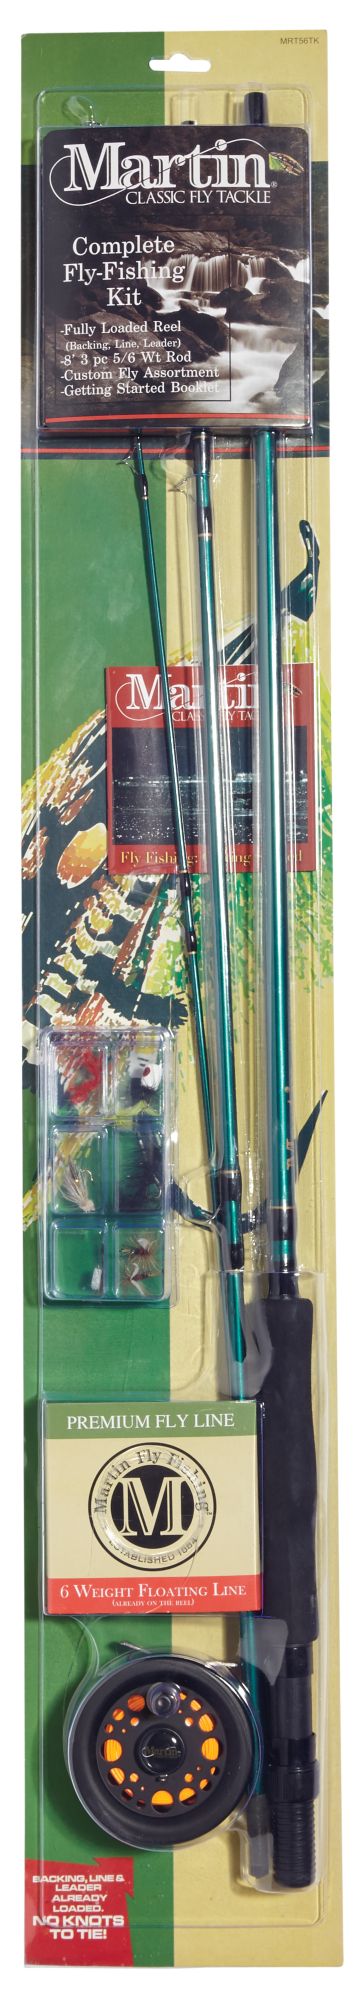 Dick's Sporting Goods Martin Complete Fly Fishing Kit